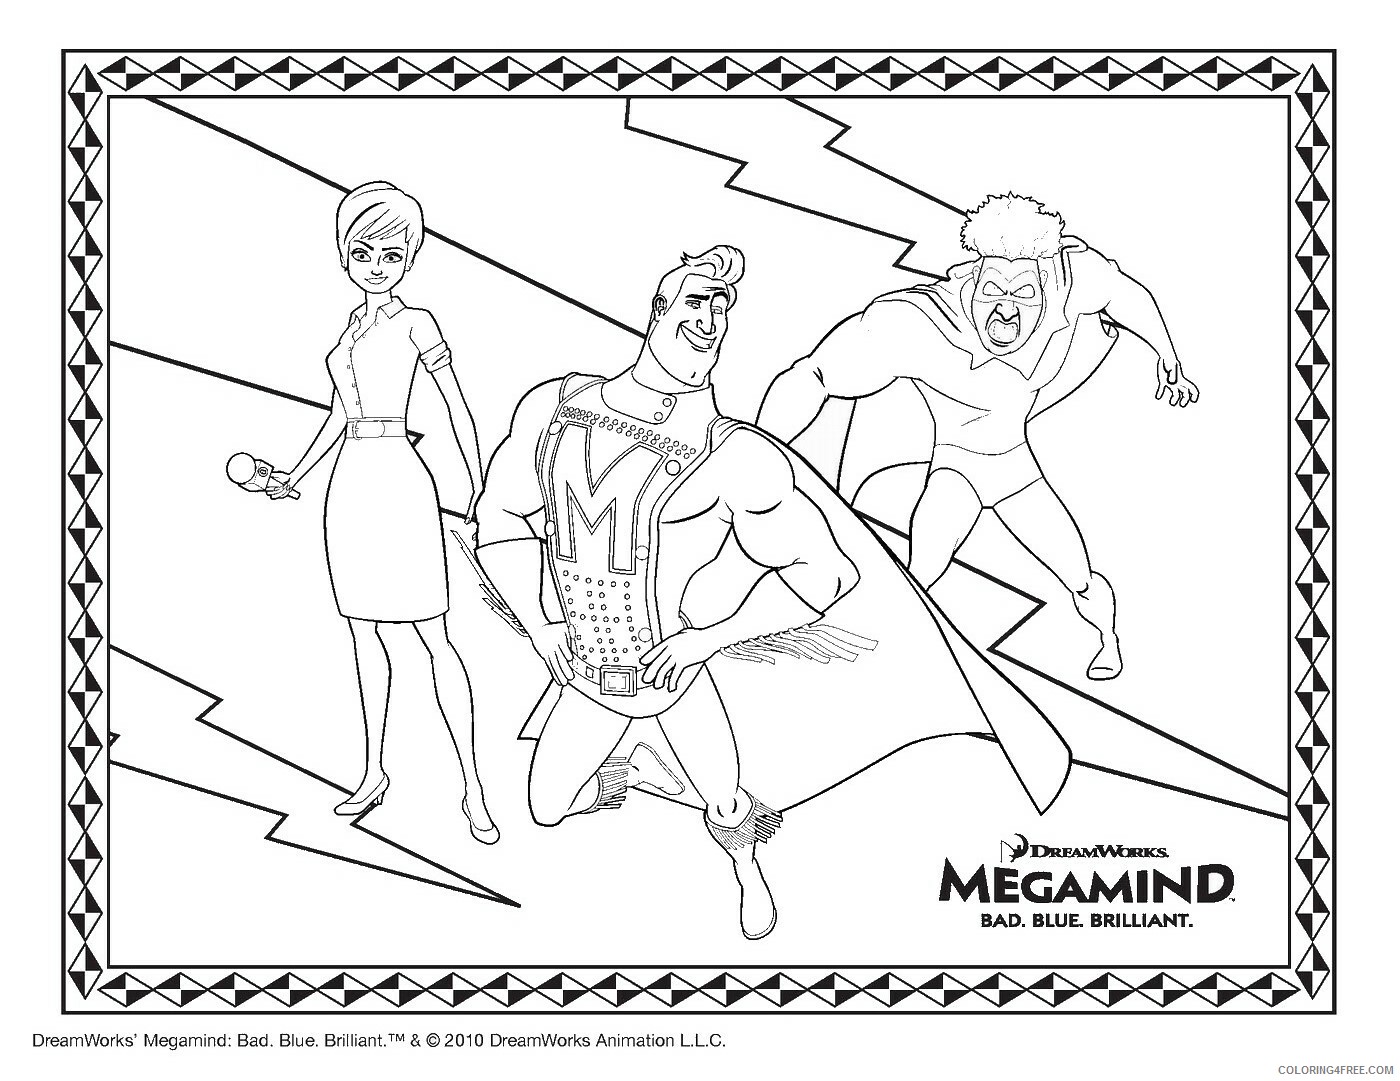 Megamind Coloring Pages TV Film megamind_cl_16 Printable 2020 05081 Coloring4free